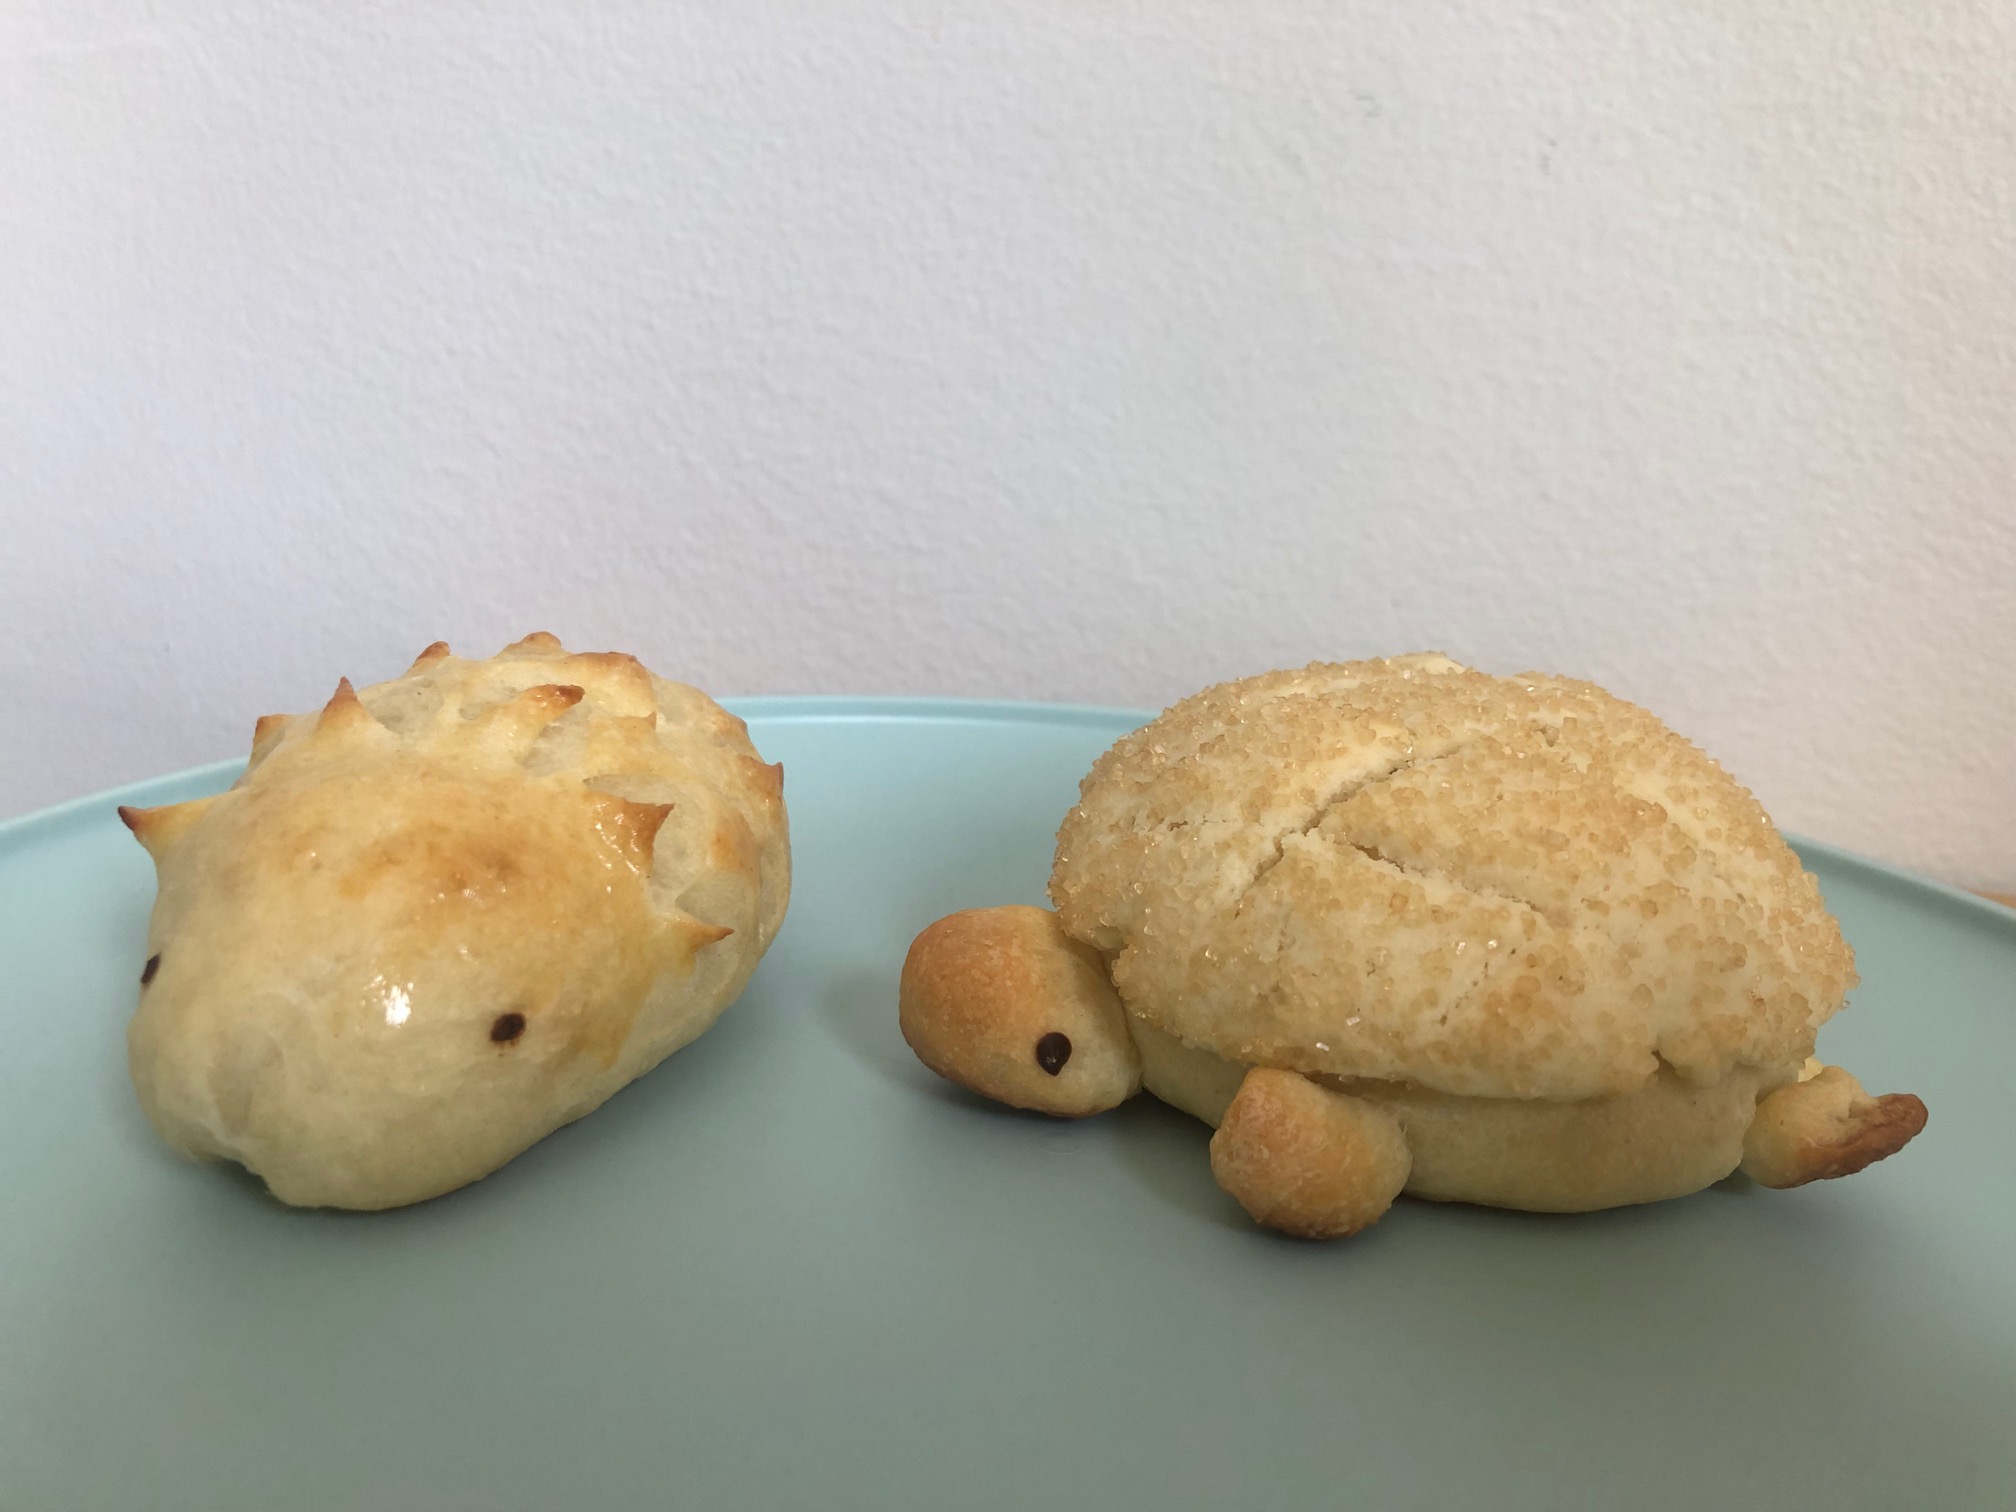 On a light blue plate, there are two animal shaped yeast rolls: a porcupine and turtle. Photo by Alyssa Buckley.